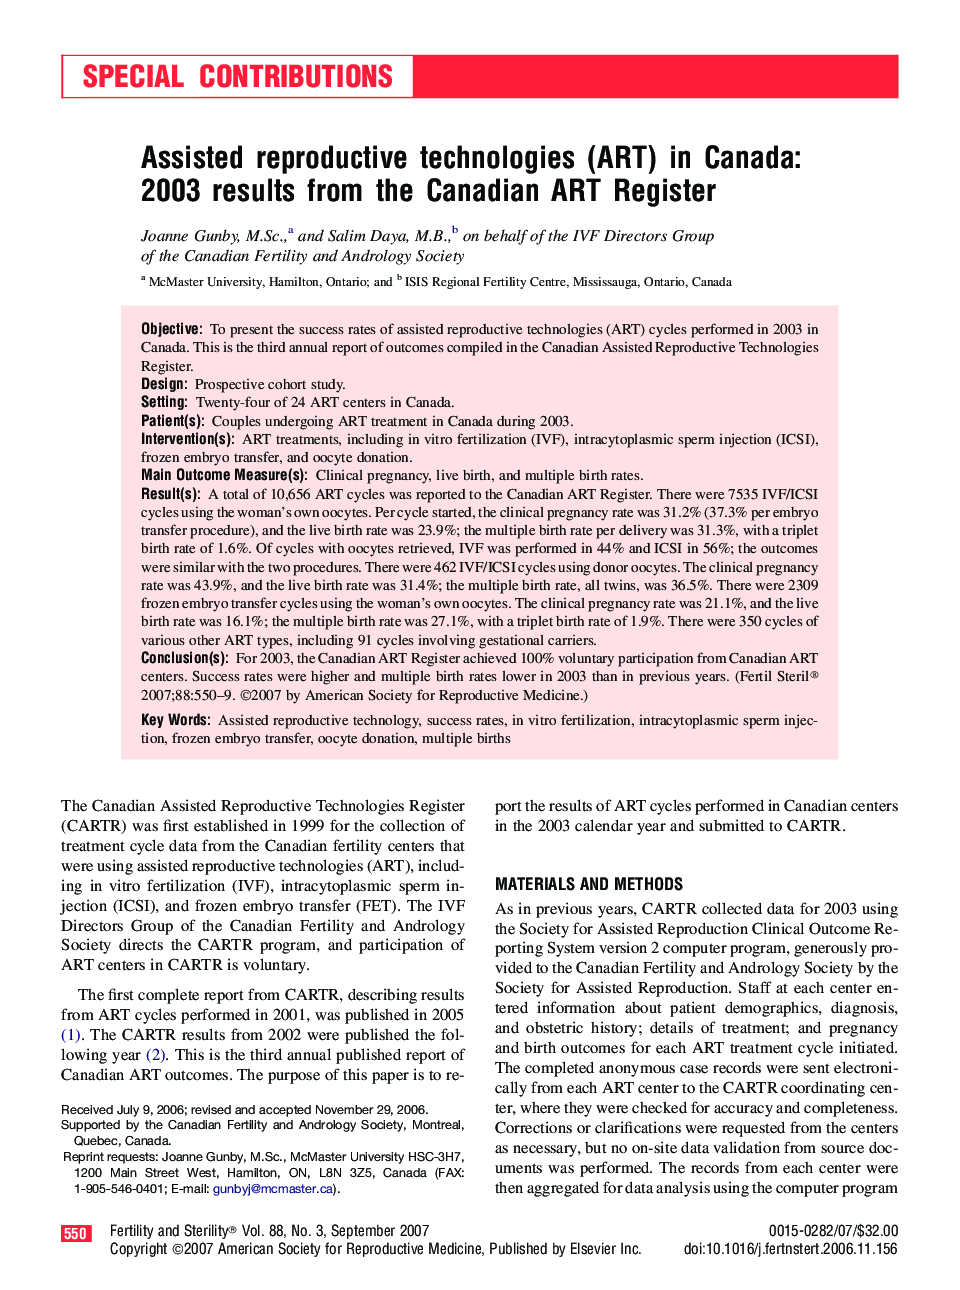 Assisted reproductive technologies (ART) in Canada: 2003 results from the Canadian ART Register 